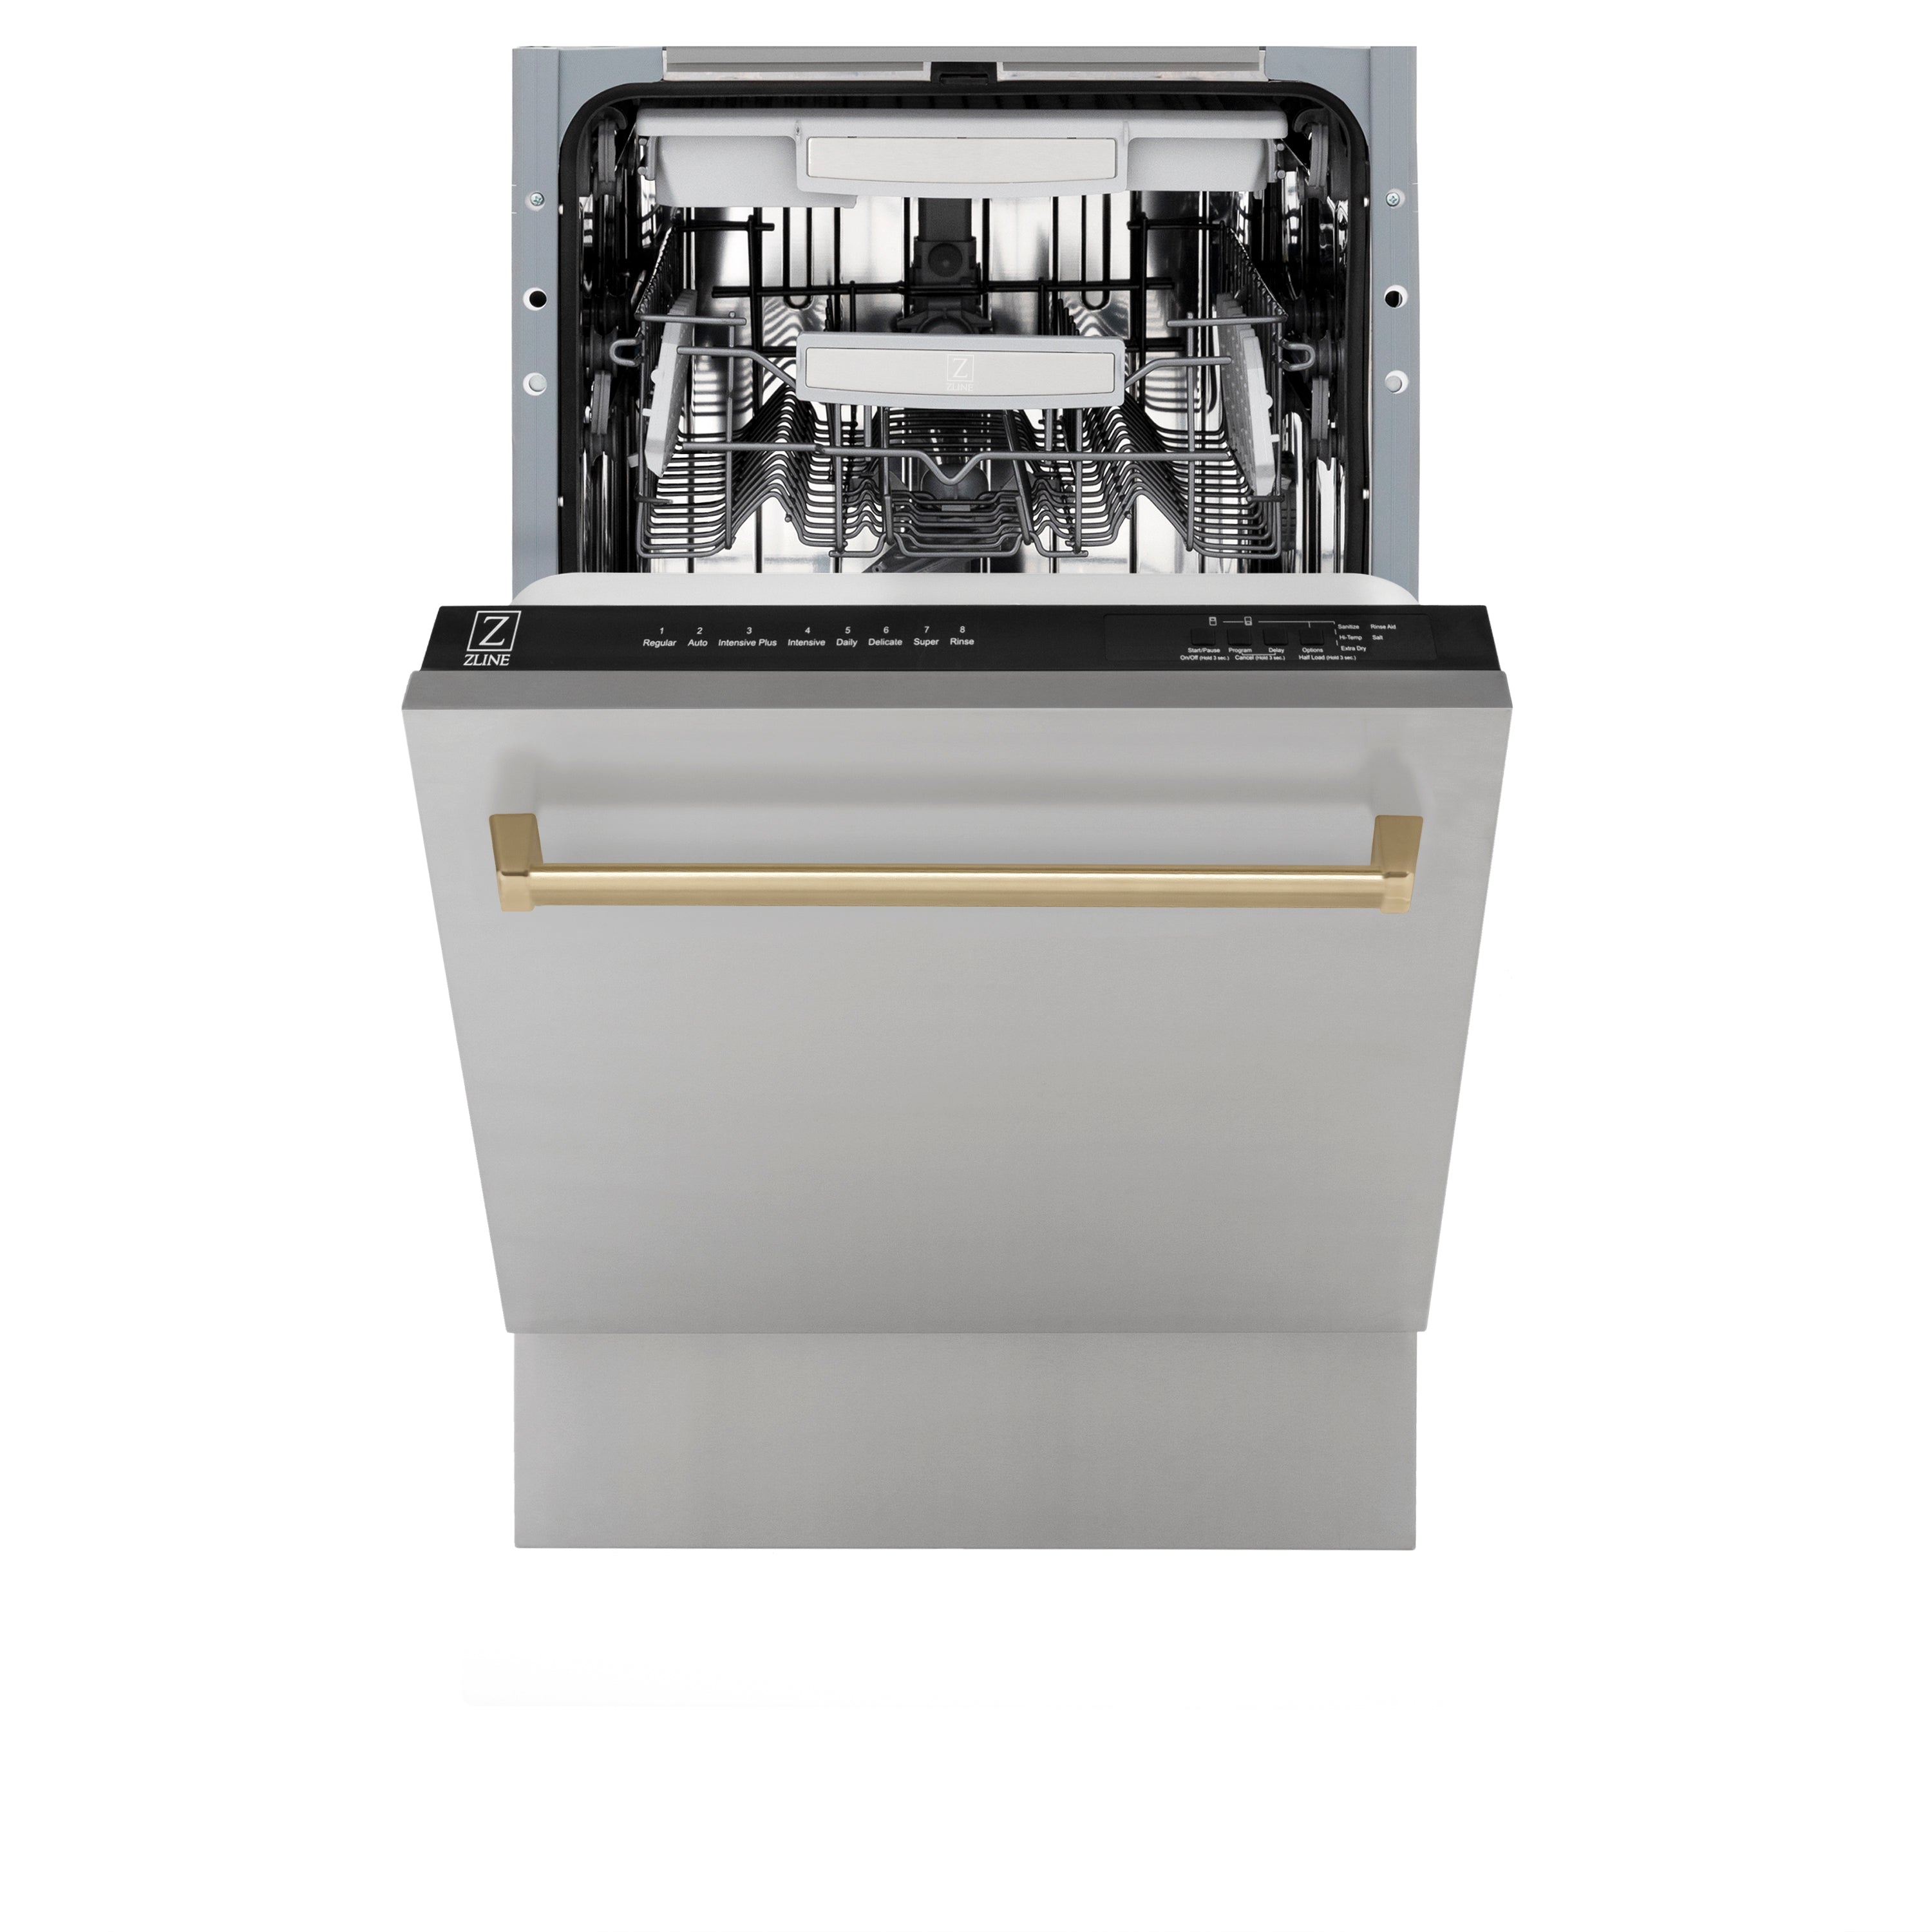 ZLINE Autograph Edition 18” Compact 3rd Rack Top Control Built-In Dishwasher in Stainless Steel with Champagne Bronze Handle, 51dBa (DWVZ-304-18-CB)